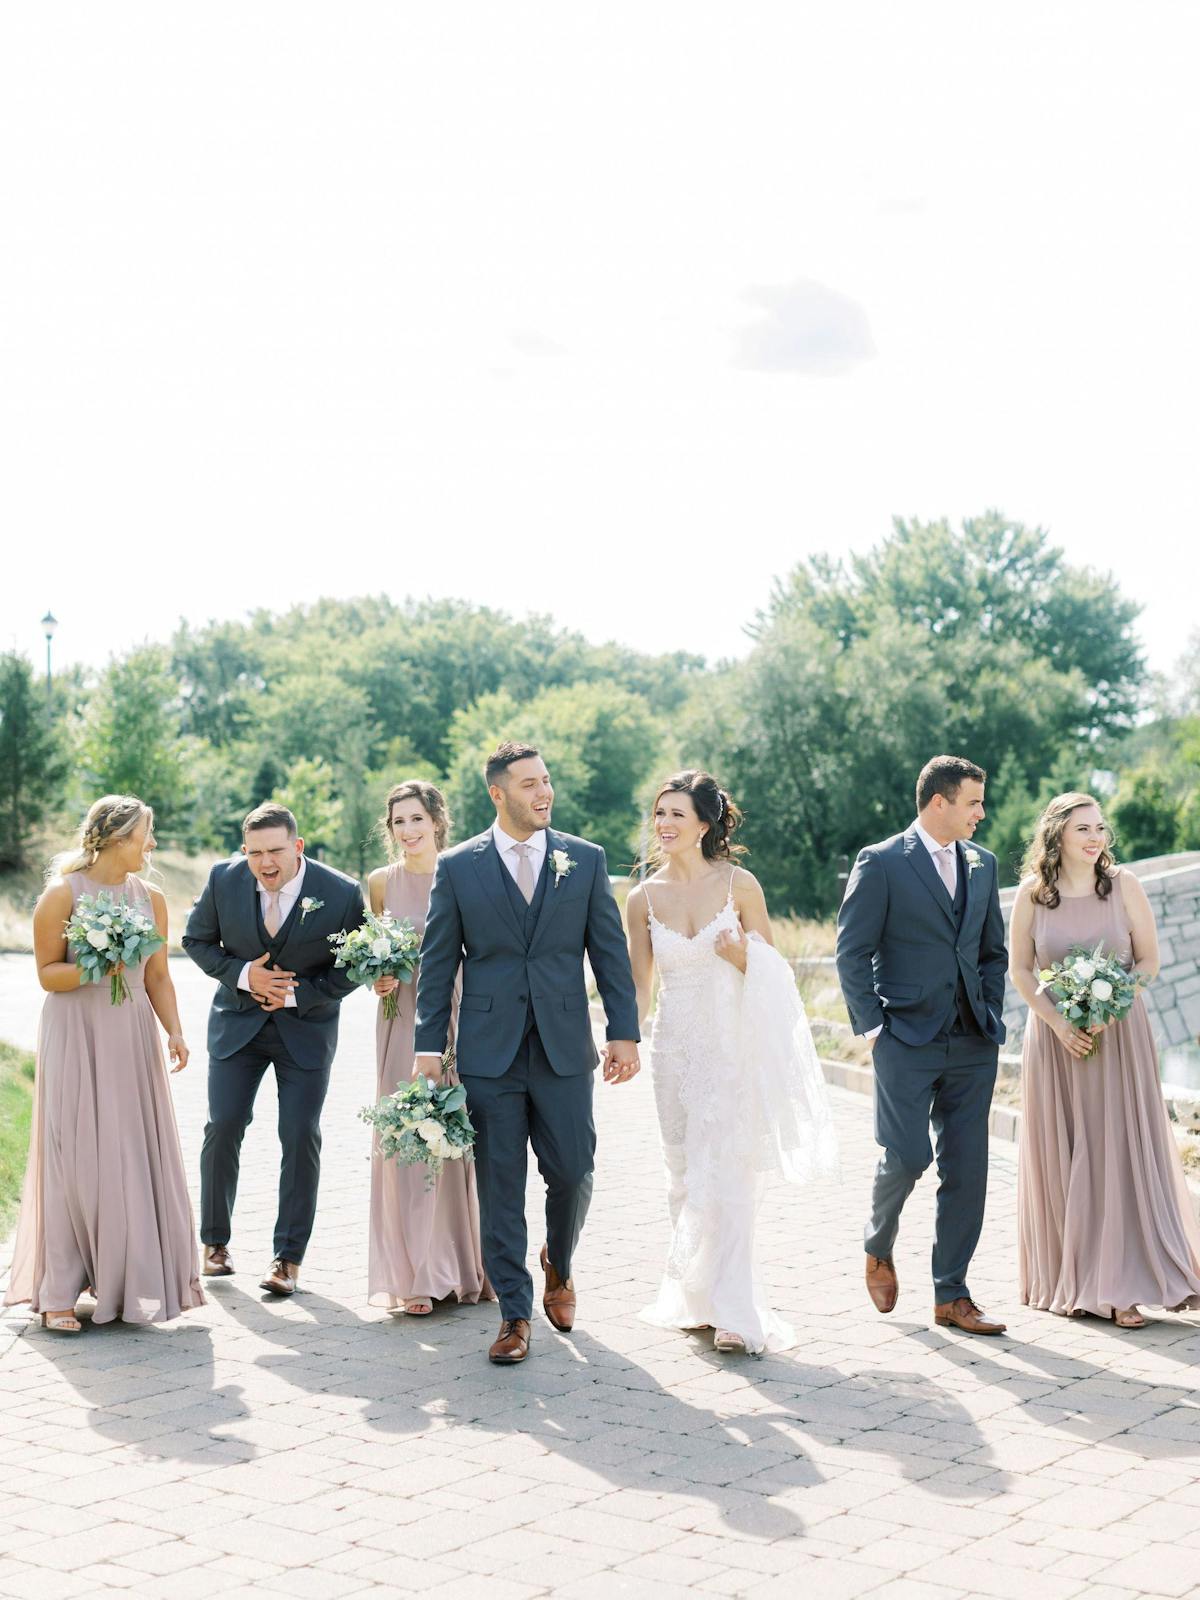 Tom & Mary - Real Weddings by Suit Shop!